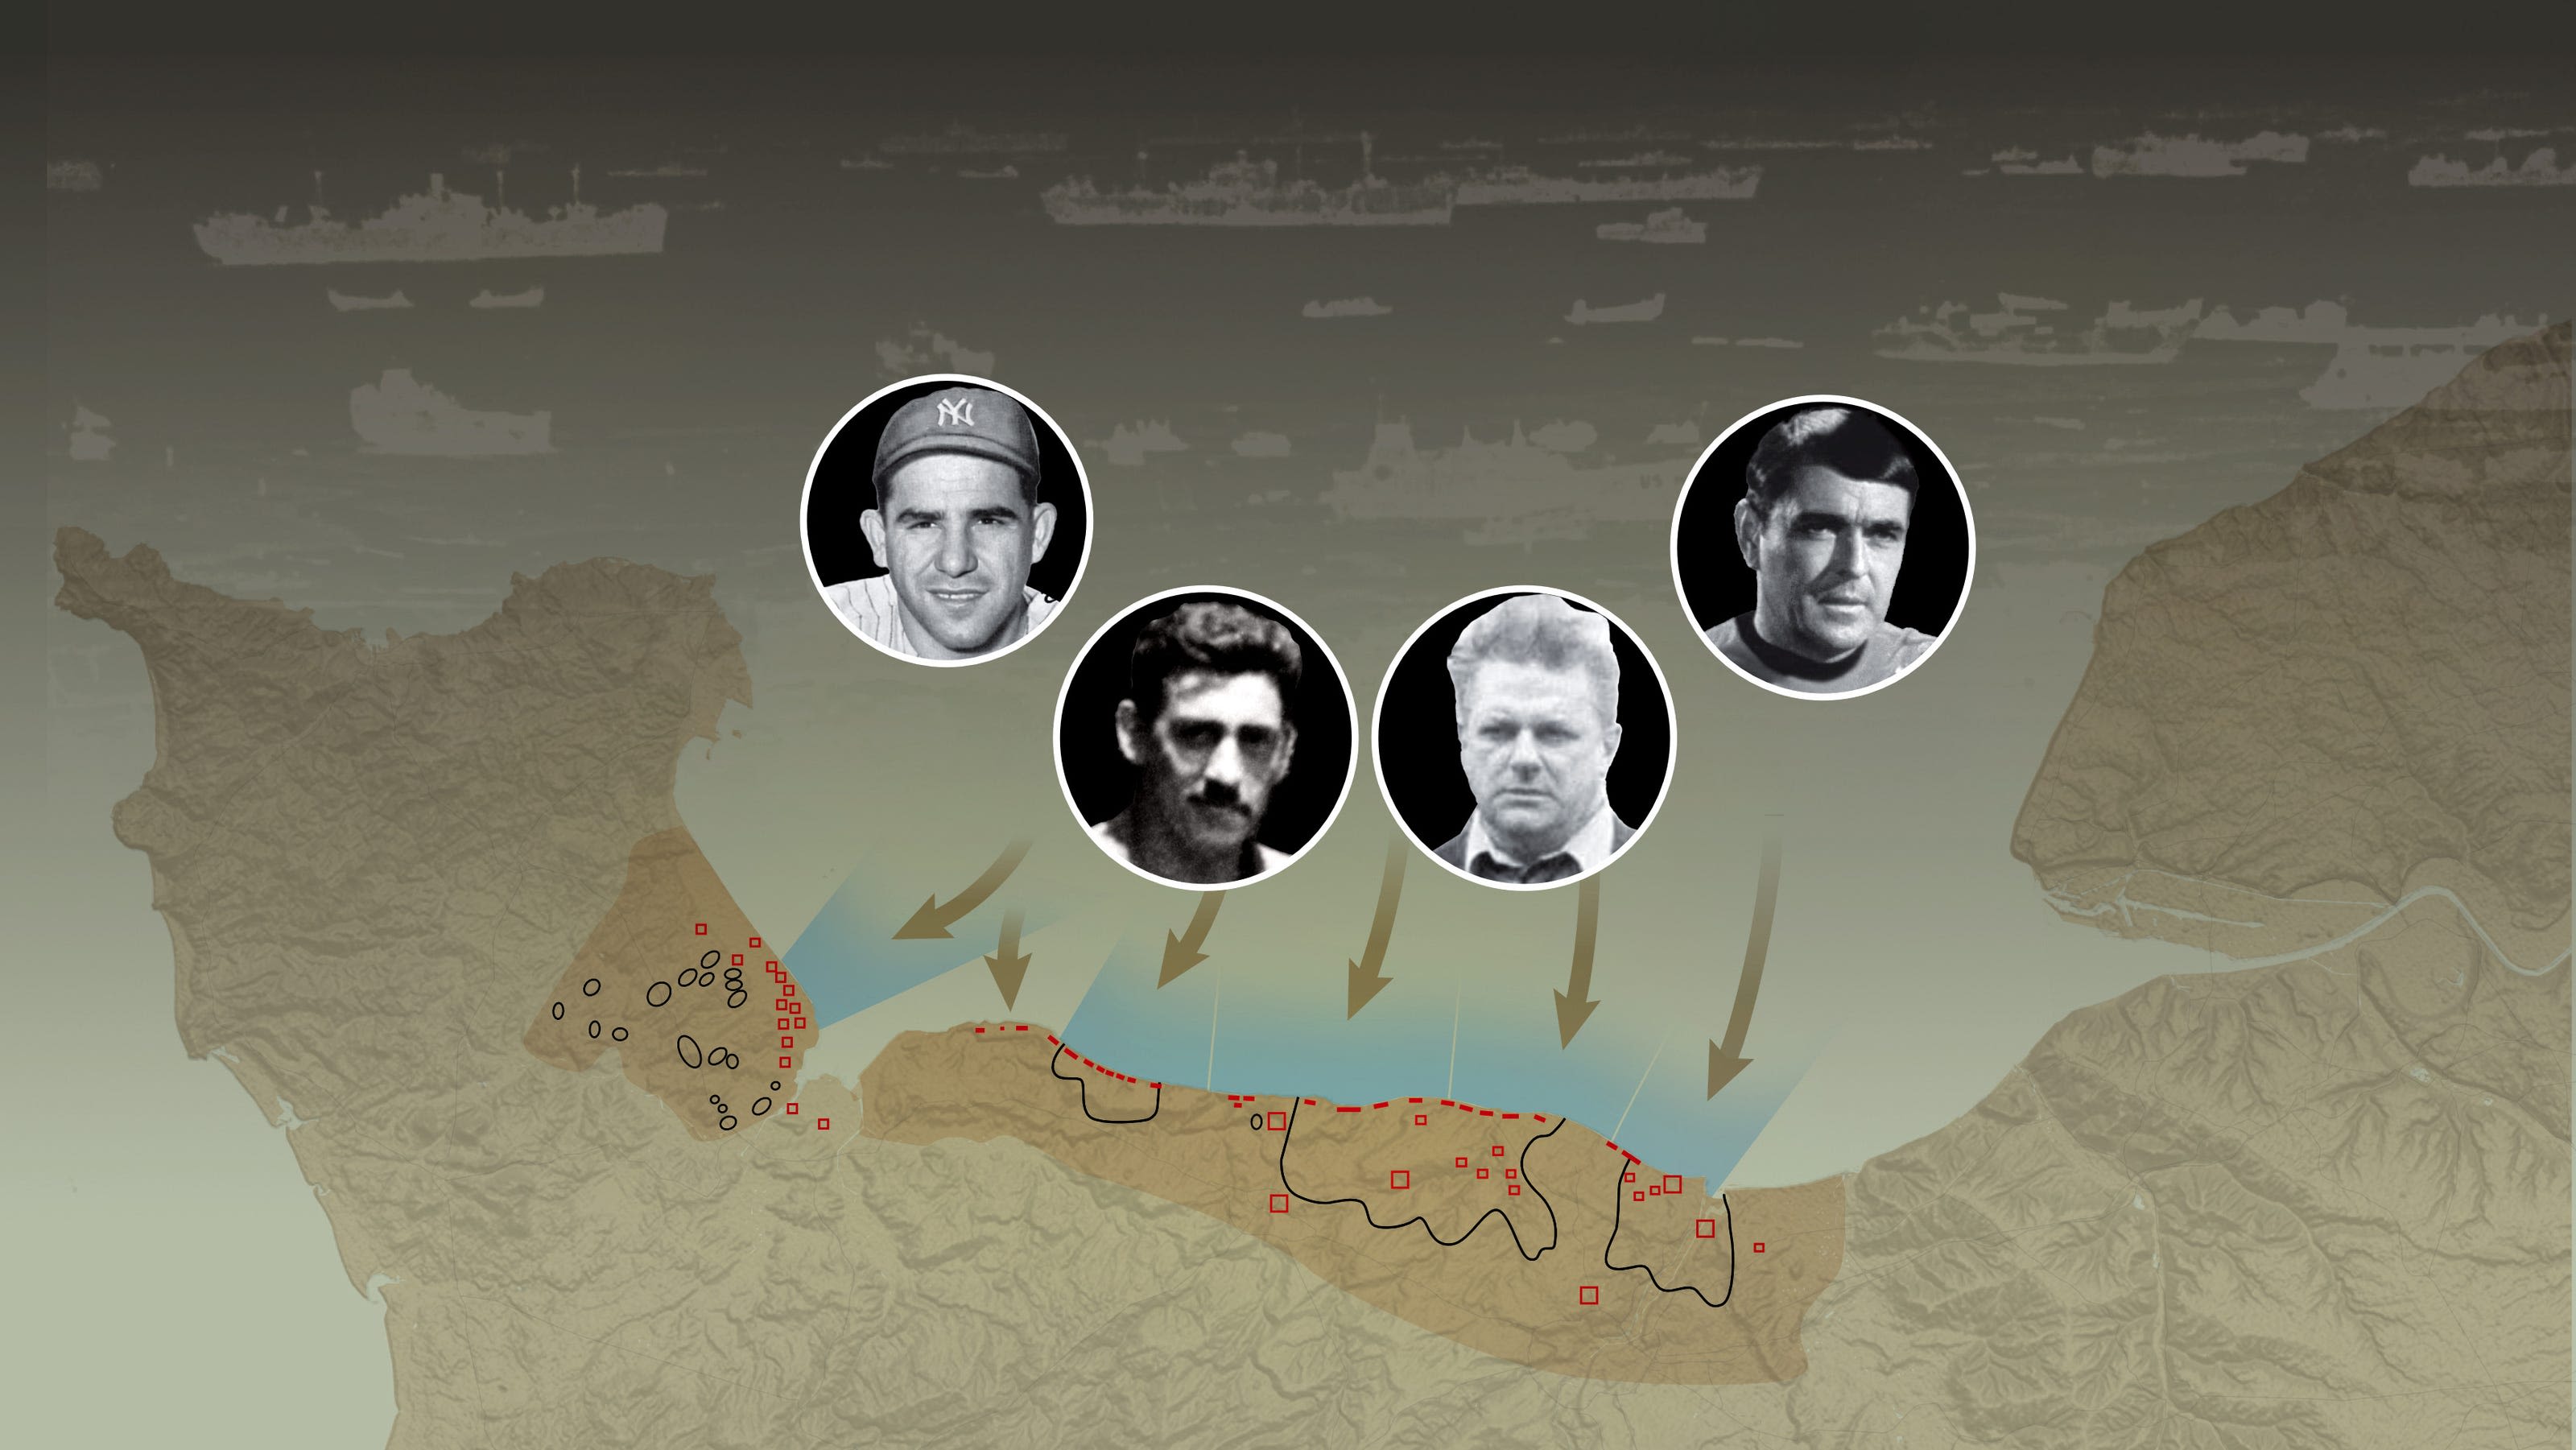 You know these four celebrities. You may not know they were part of the D-Day invasion.